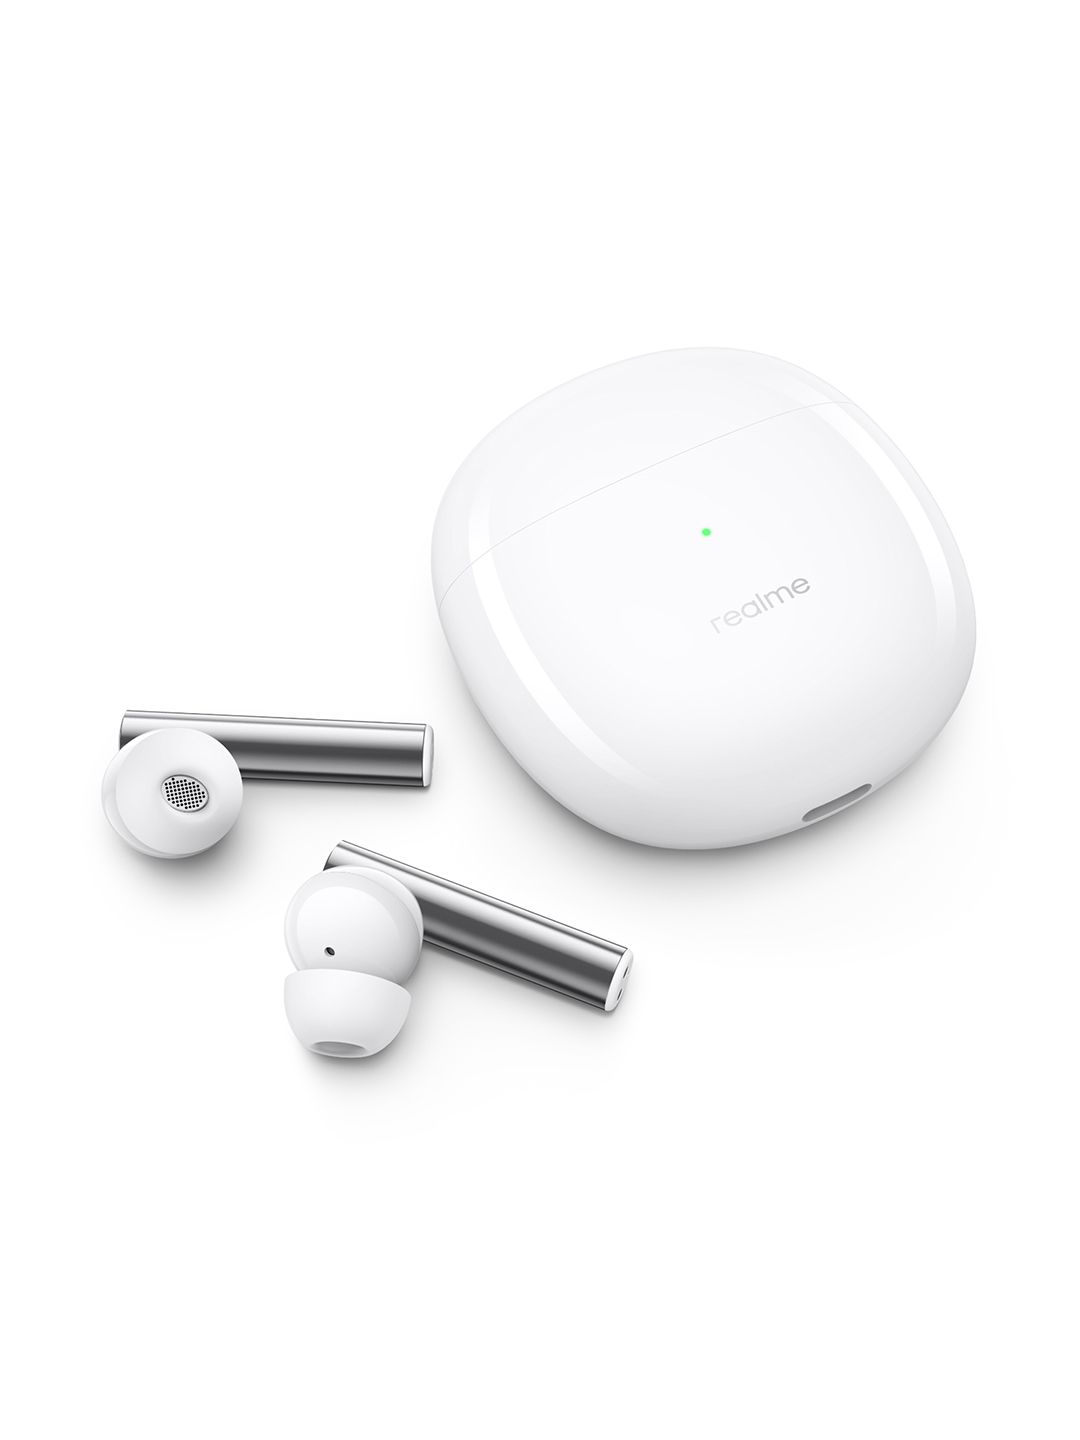 Realme White Buds Air 2 True Wireless Bluetooth Headphones with Active Noise Cancellation Price in India